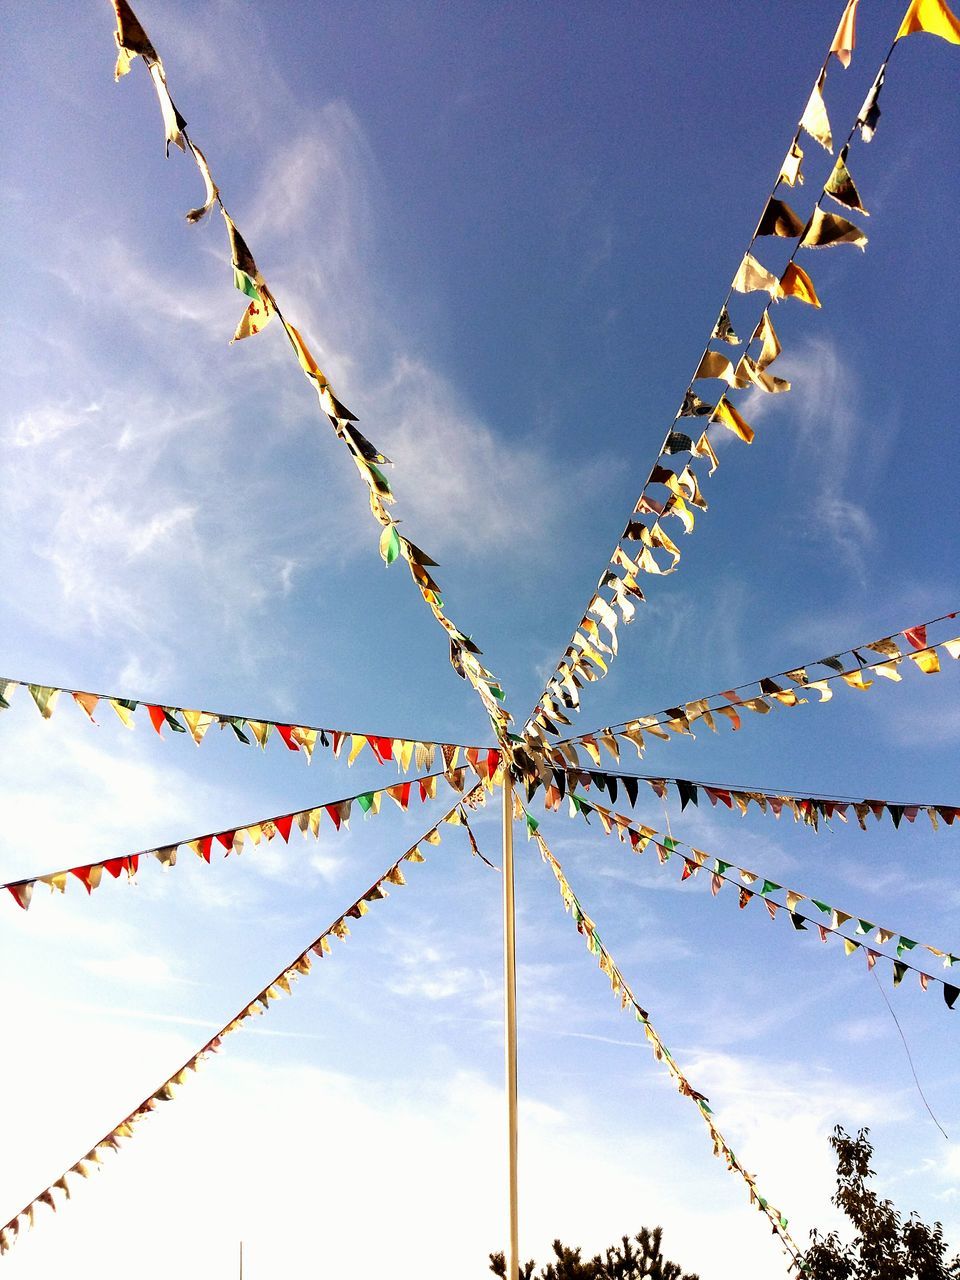 low angle view, sky, cloud - sky, bunting, celebration, outdoors, cultures, day, no people, cable, tradition, multi colored, hanging, spirituality, blue, nature